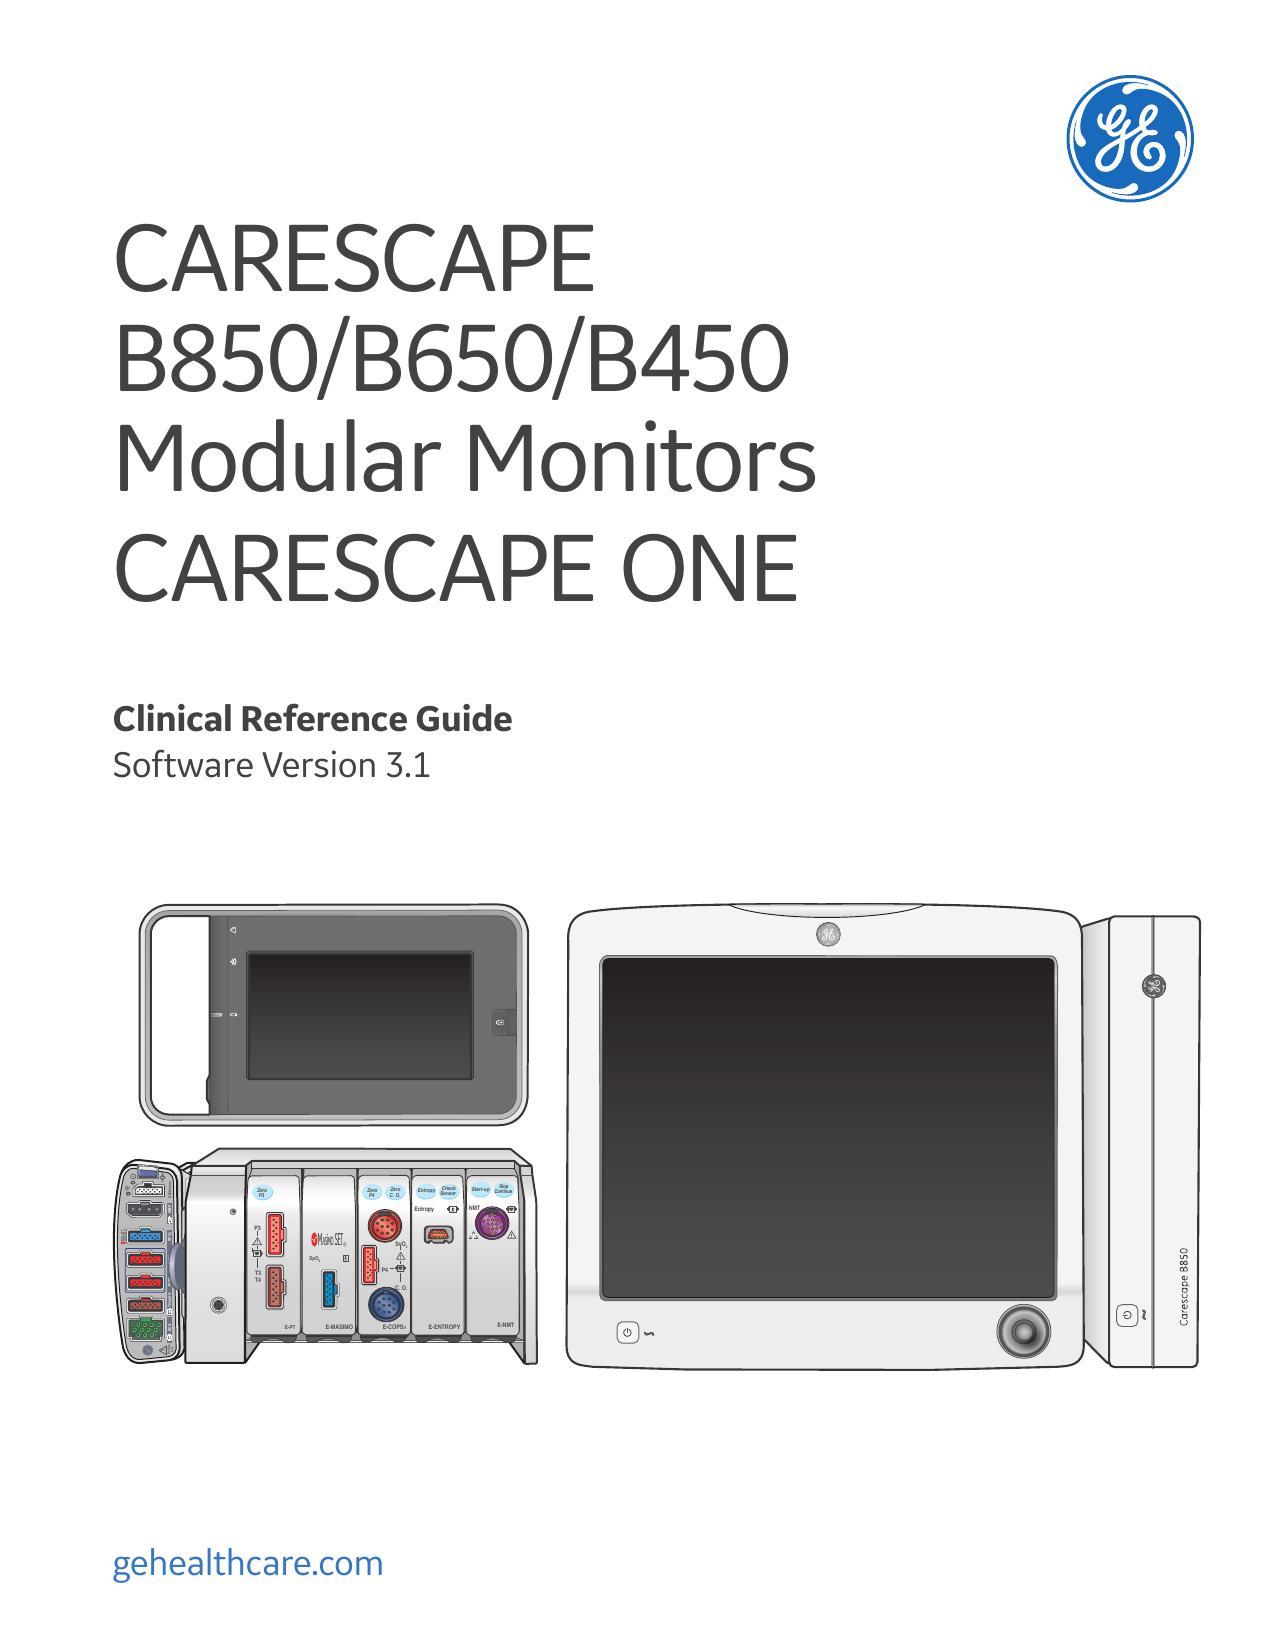 carescape-b850b650b450-modular-monitors-carescape-one-clinical-reference-guide-software-version-31.pdf